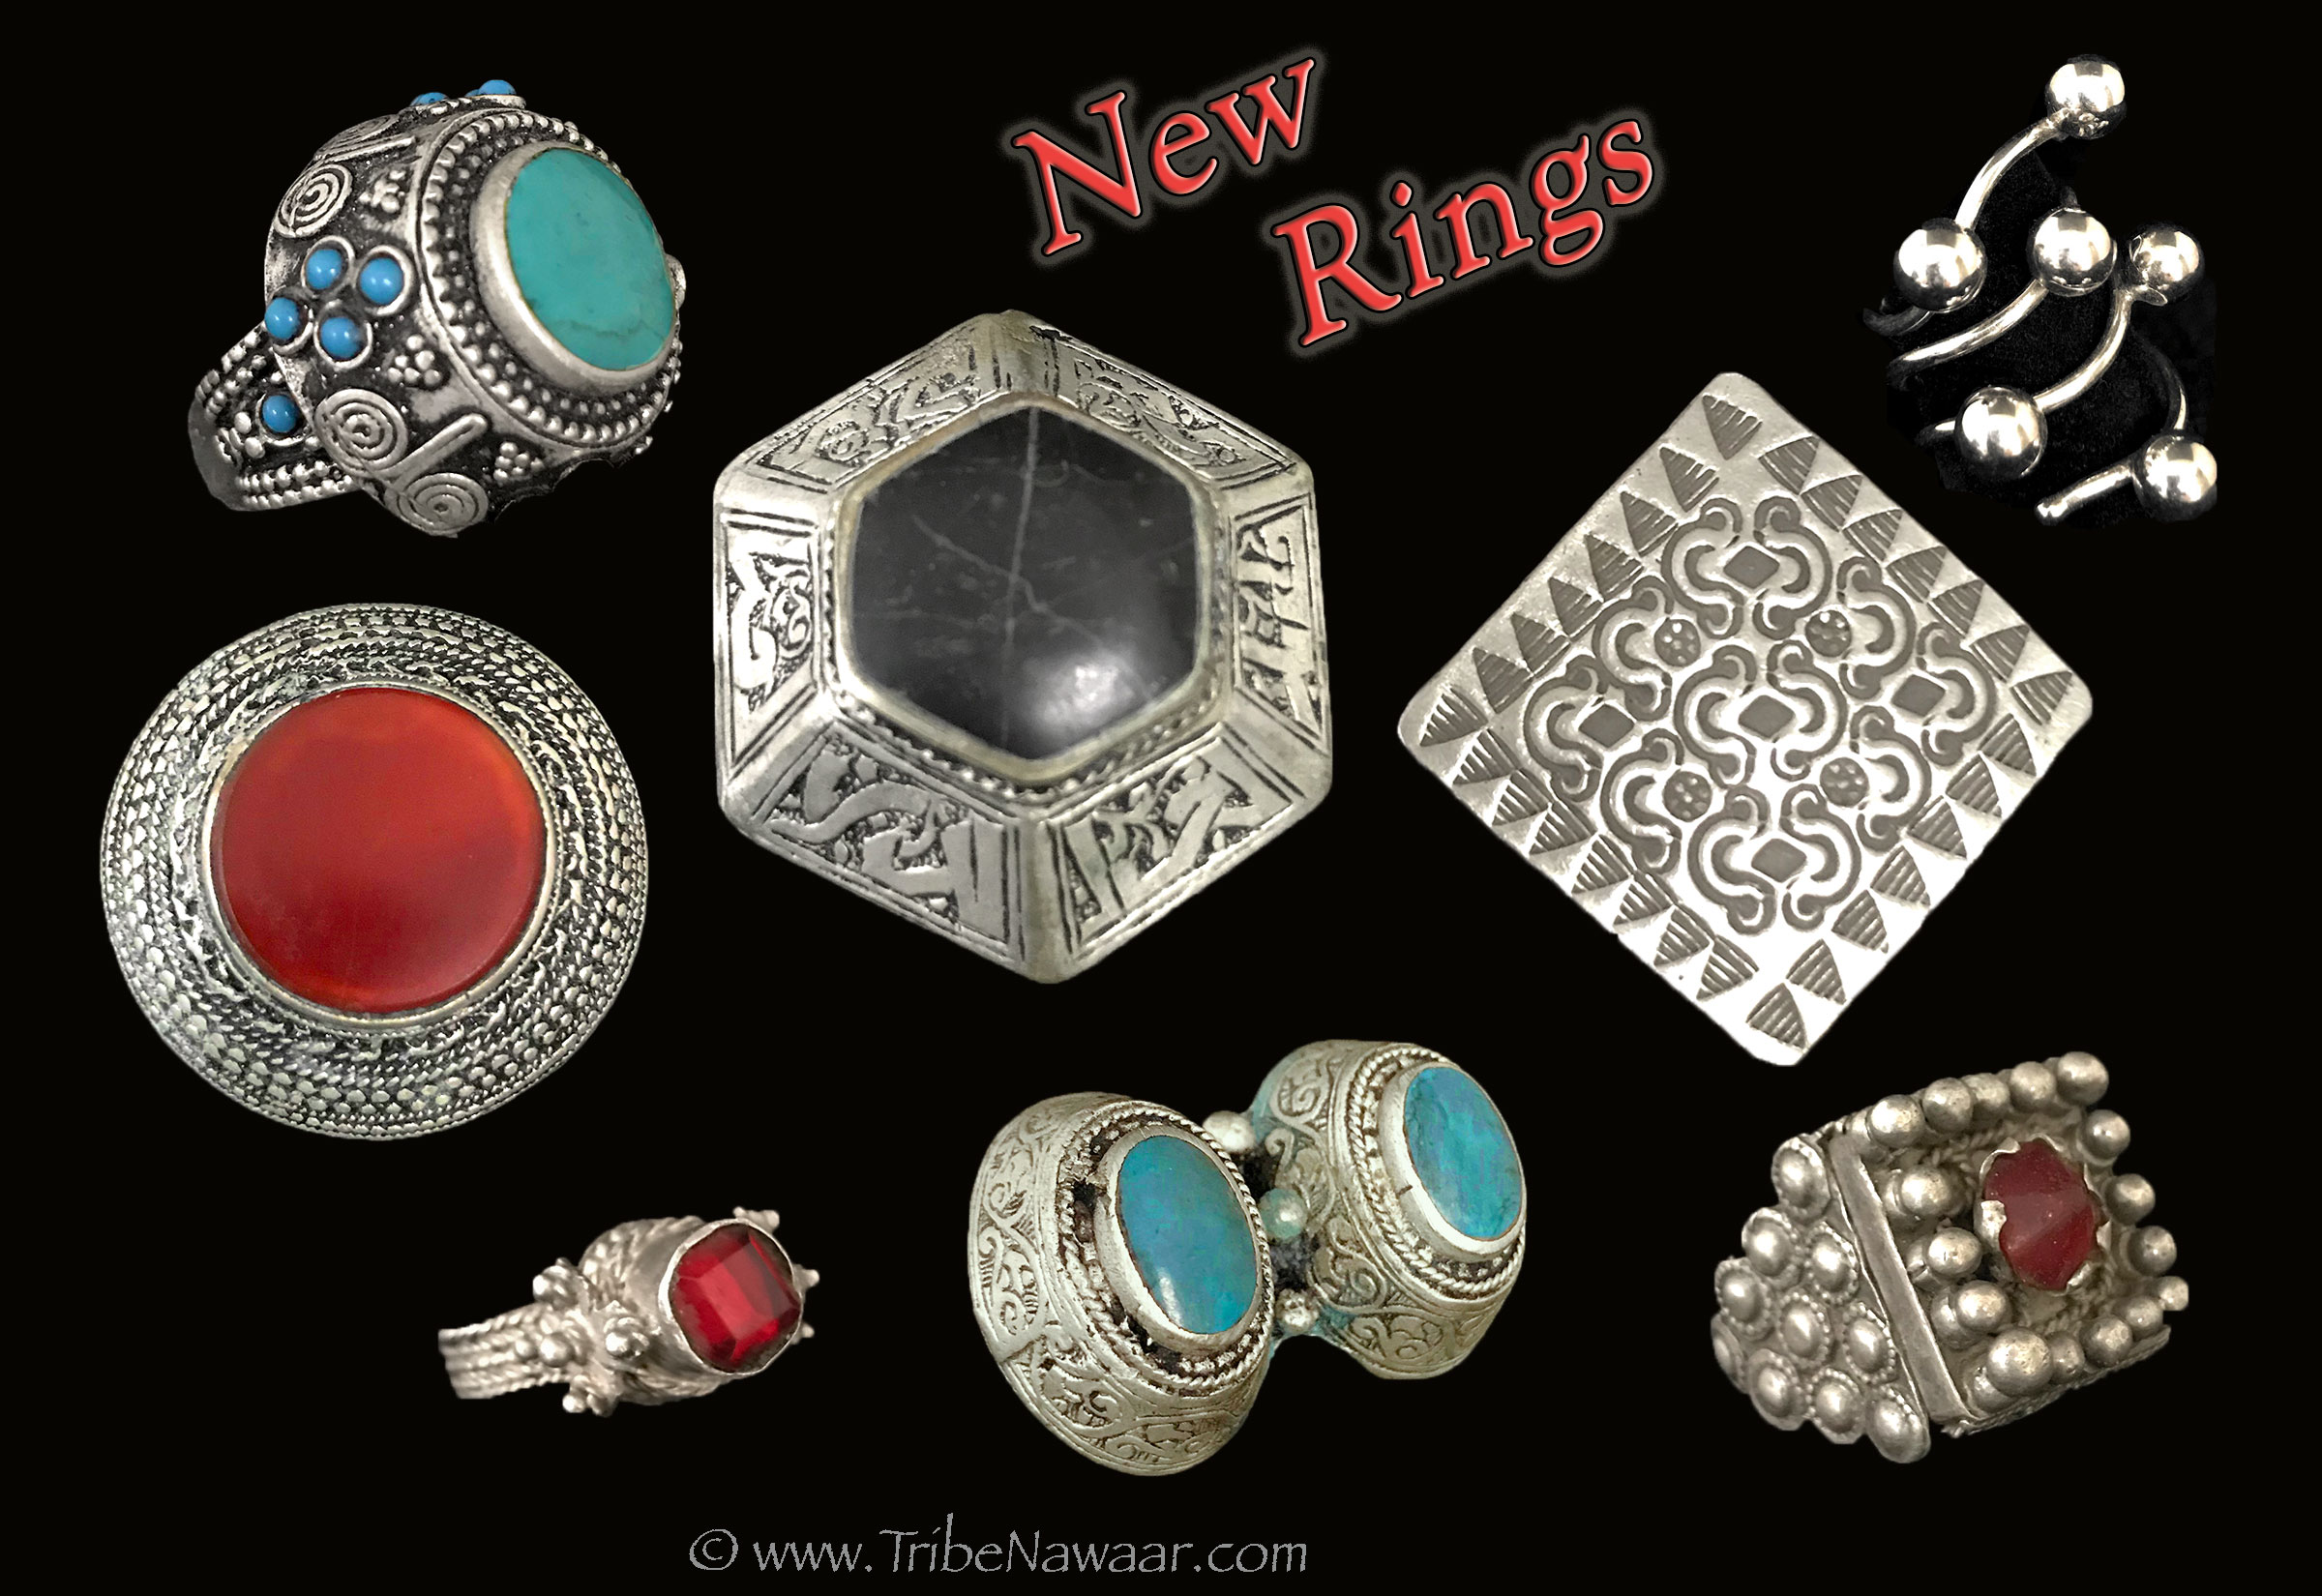 New rings for belly dancers from Tribe Nawaar